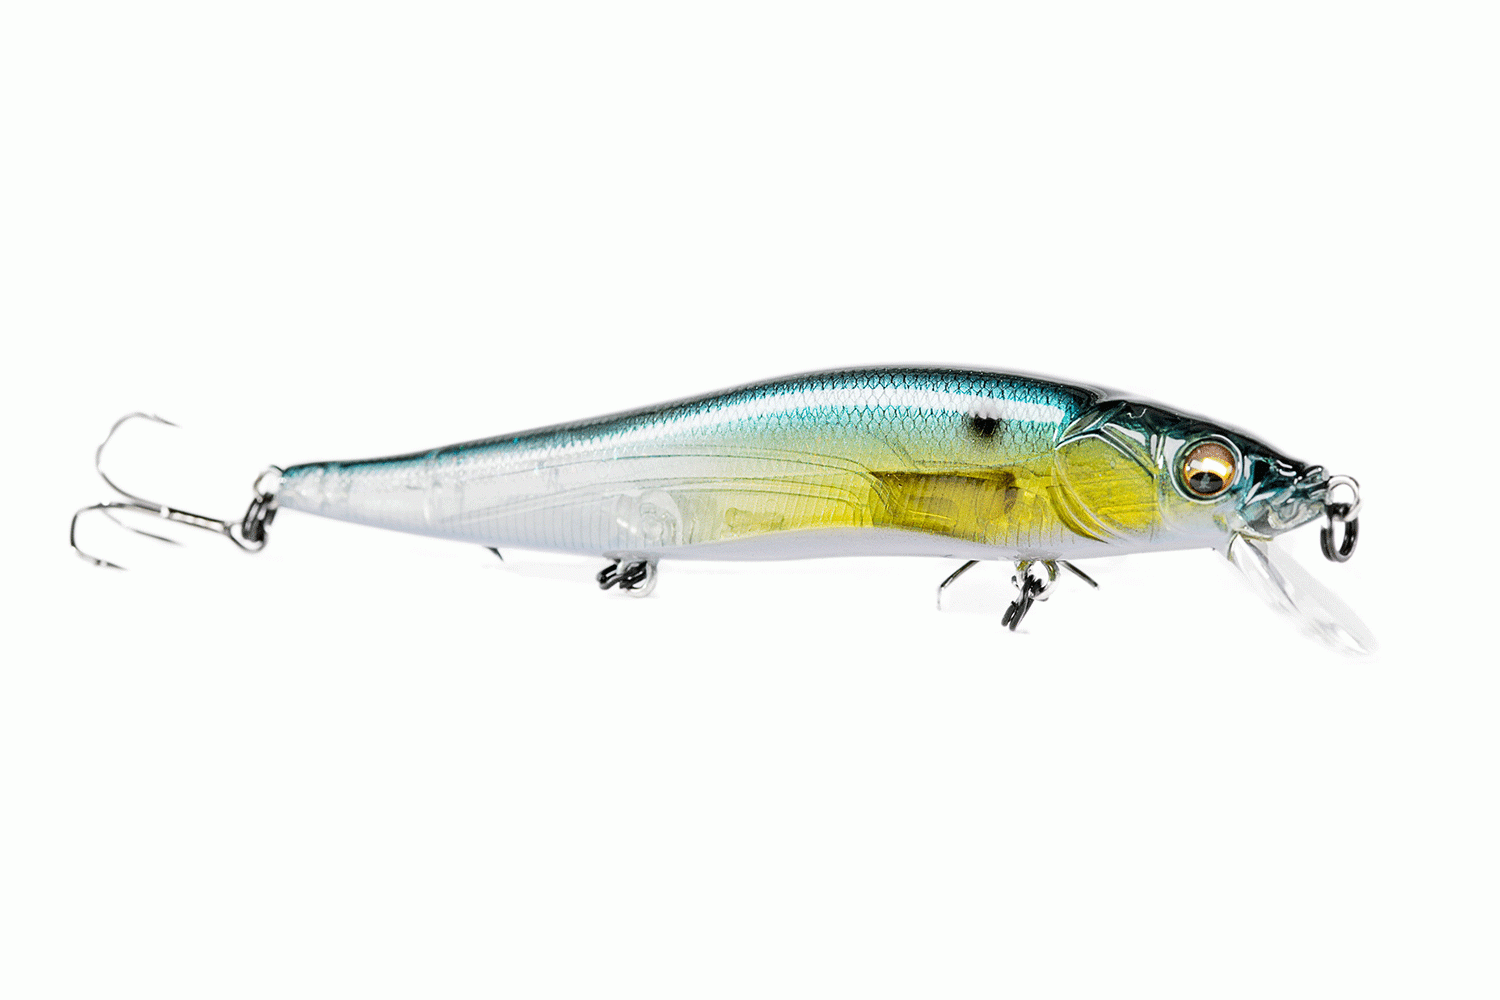 <p><b>Megabass Vision Oneten Silent, $24.99</b></p> Oneten Silent brings deadly stealth to the renowned performance of the Vision Onten jerkbait, unleashing a covert new weapon upon highly-pressured tournament waters. Built for highly-pressured target fish, the Oneten Silent expands the traditional jerkbait bite window with a stealth offering perfectly suited to the toughest conditions and highest demands of tournament anglers. <br> <a href=